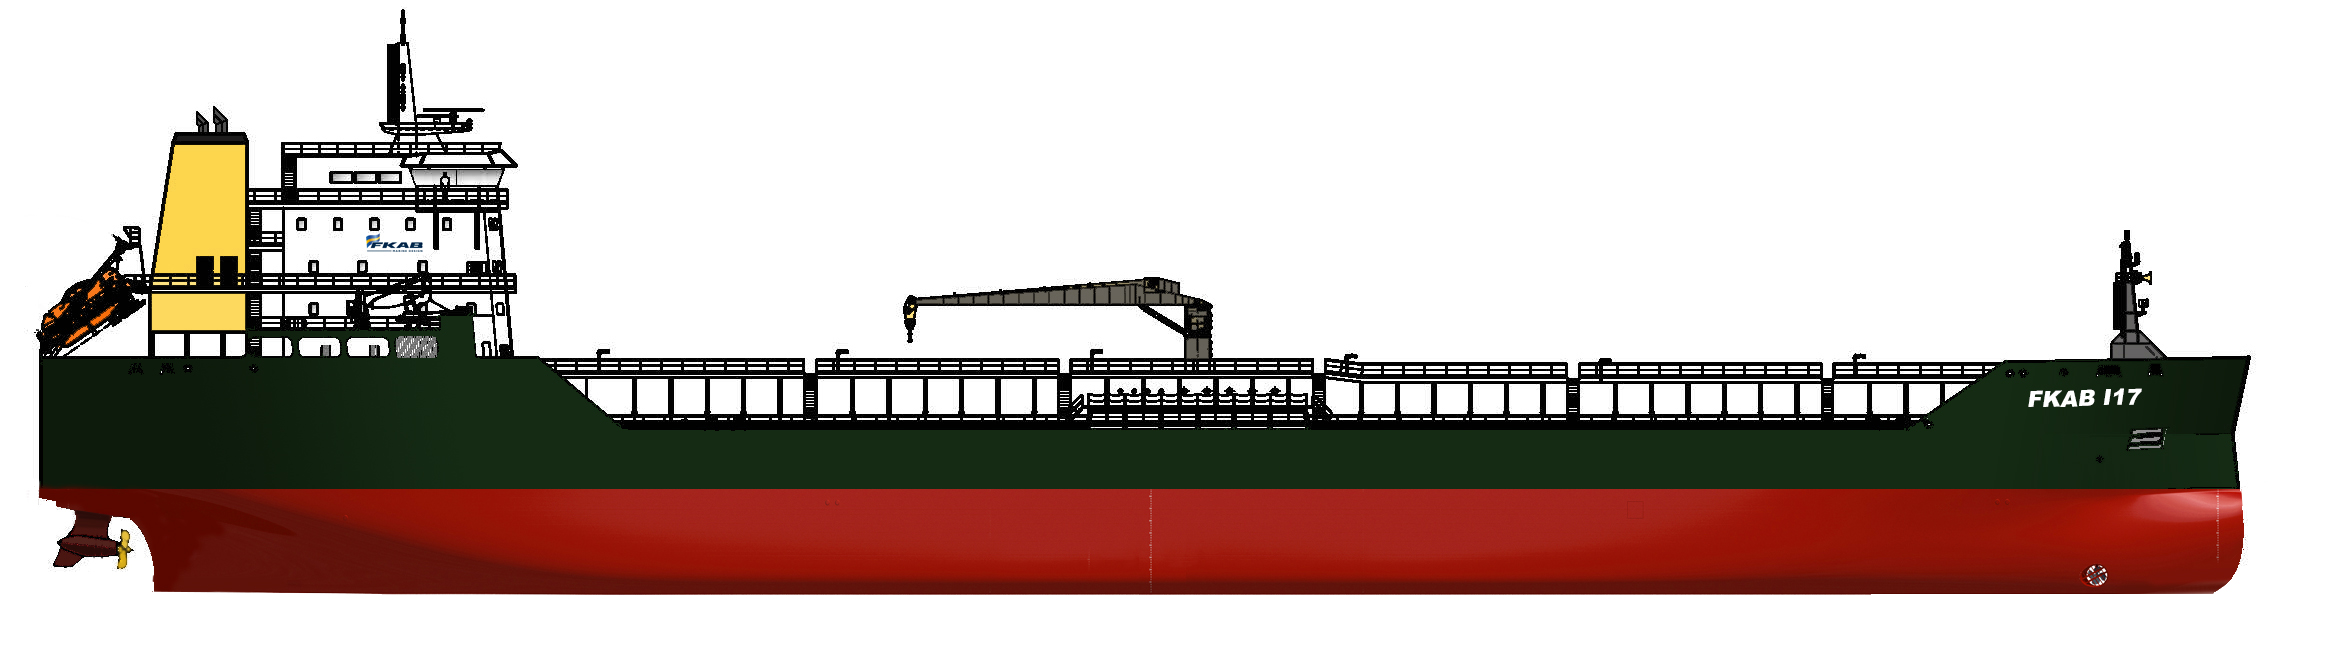 15,000-dwt asphalt carrier to be equipped with SCHOTTEL EcoPellers